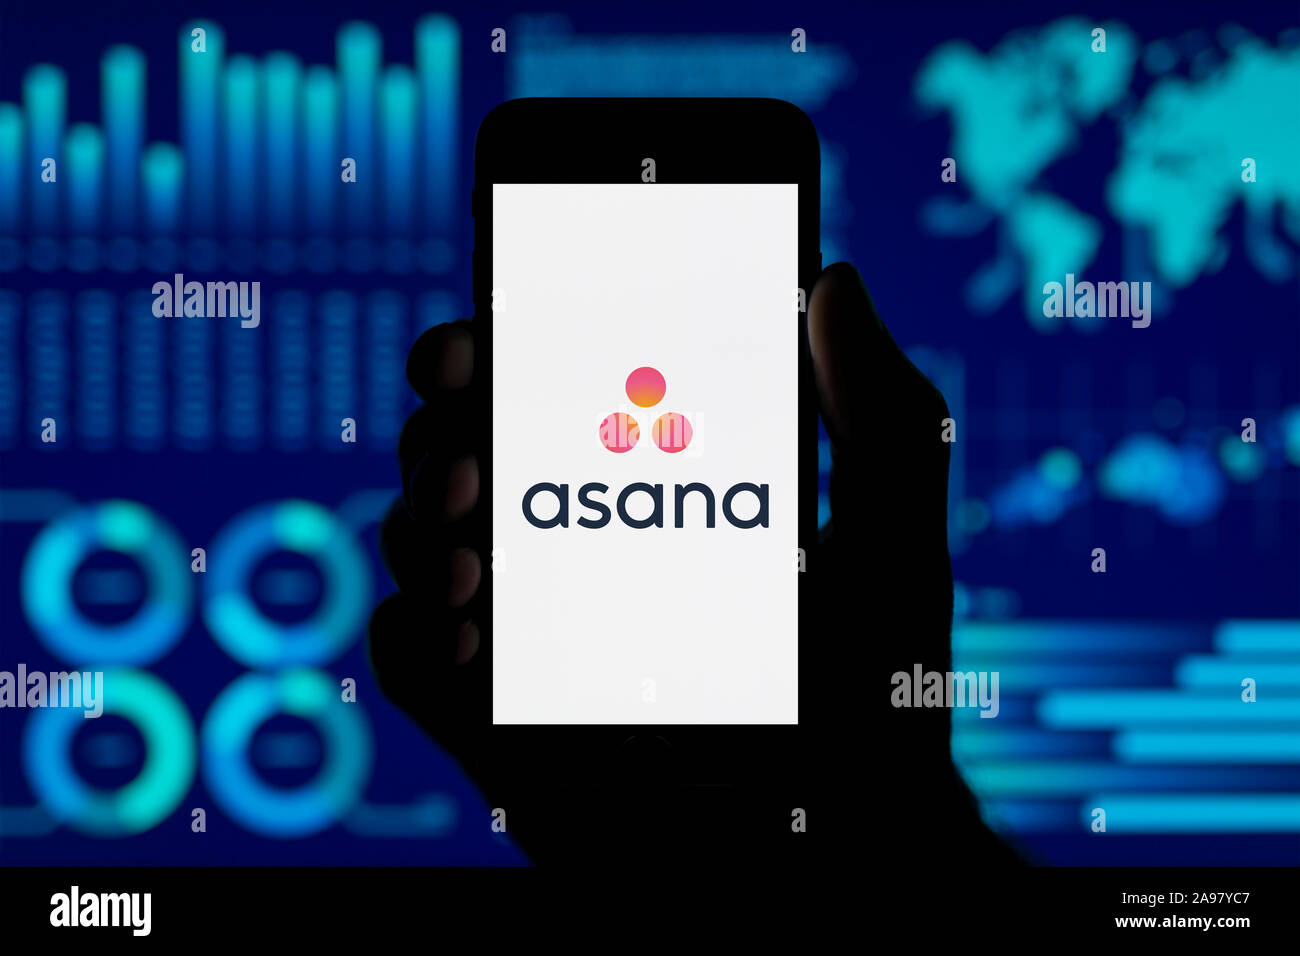 A man holds up an iPhone which displays the Asana logo, shot against a data visualisation style background (Editorial use only). Stock Photo